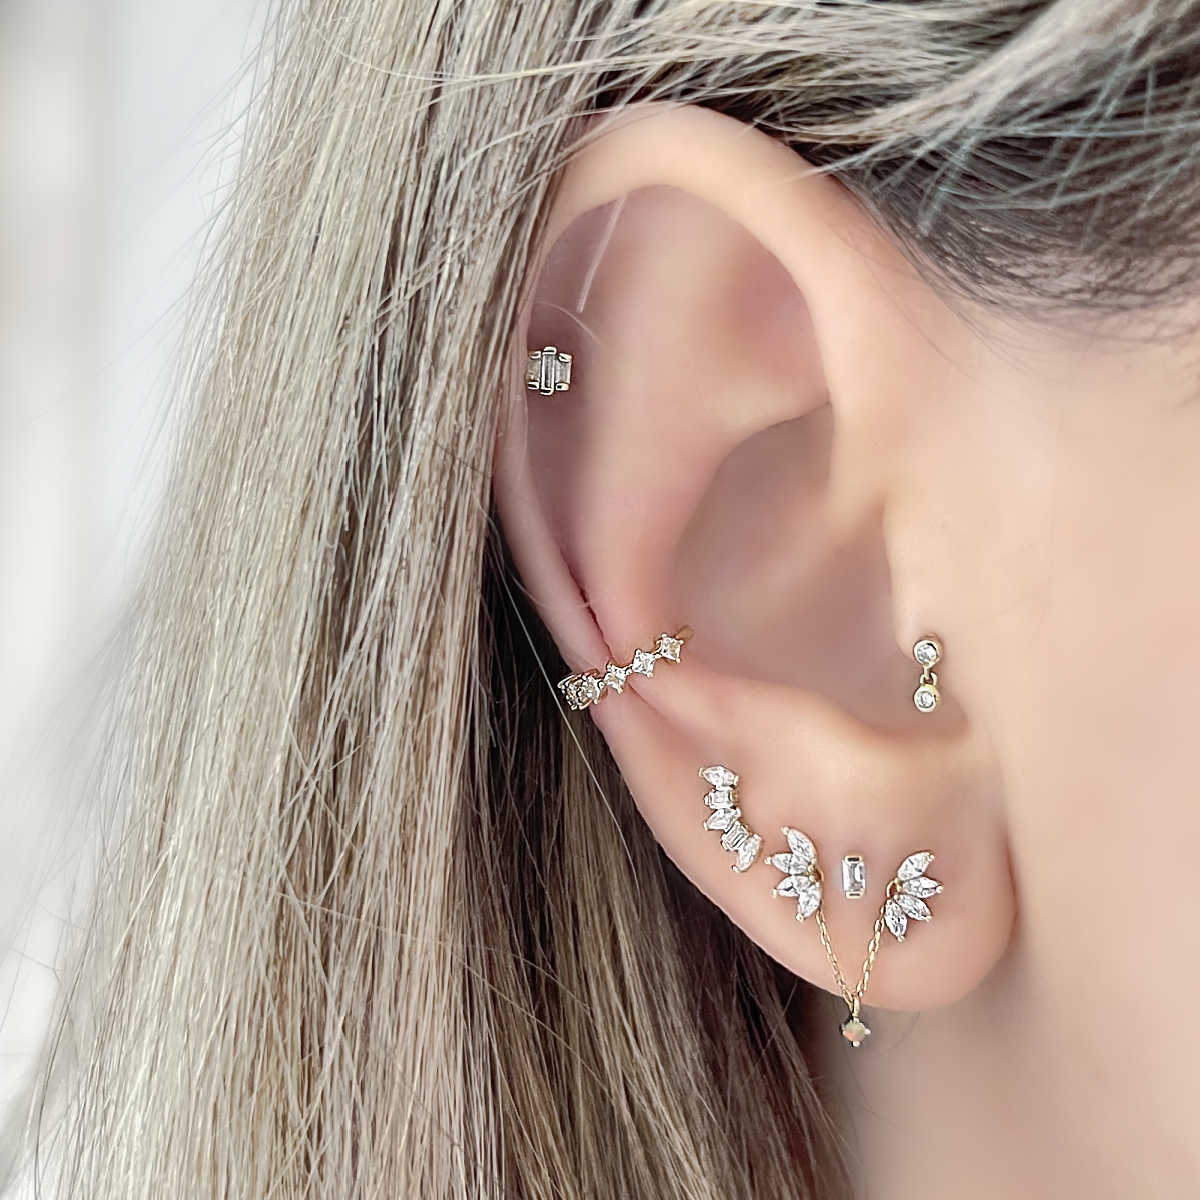 Diamond Earring Charm on Lobe | Double Hole Connected Earrings from Two of Most